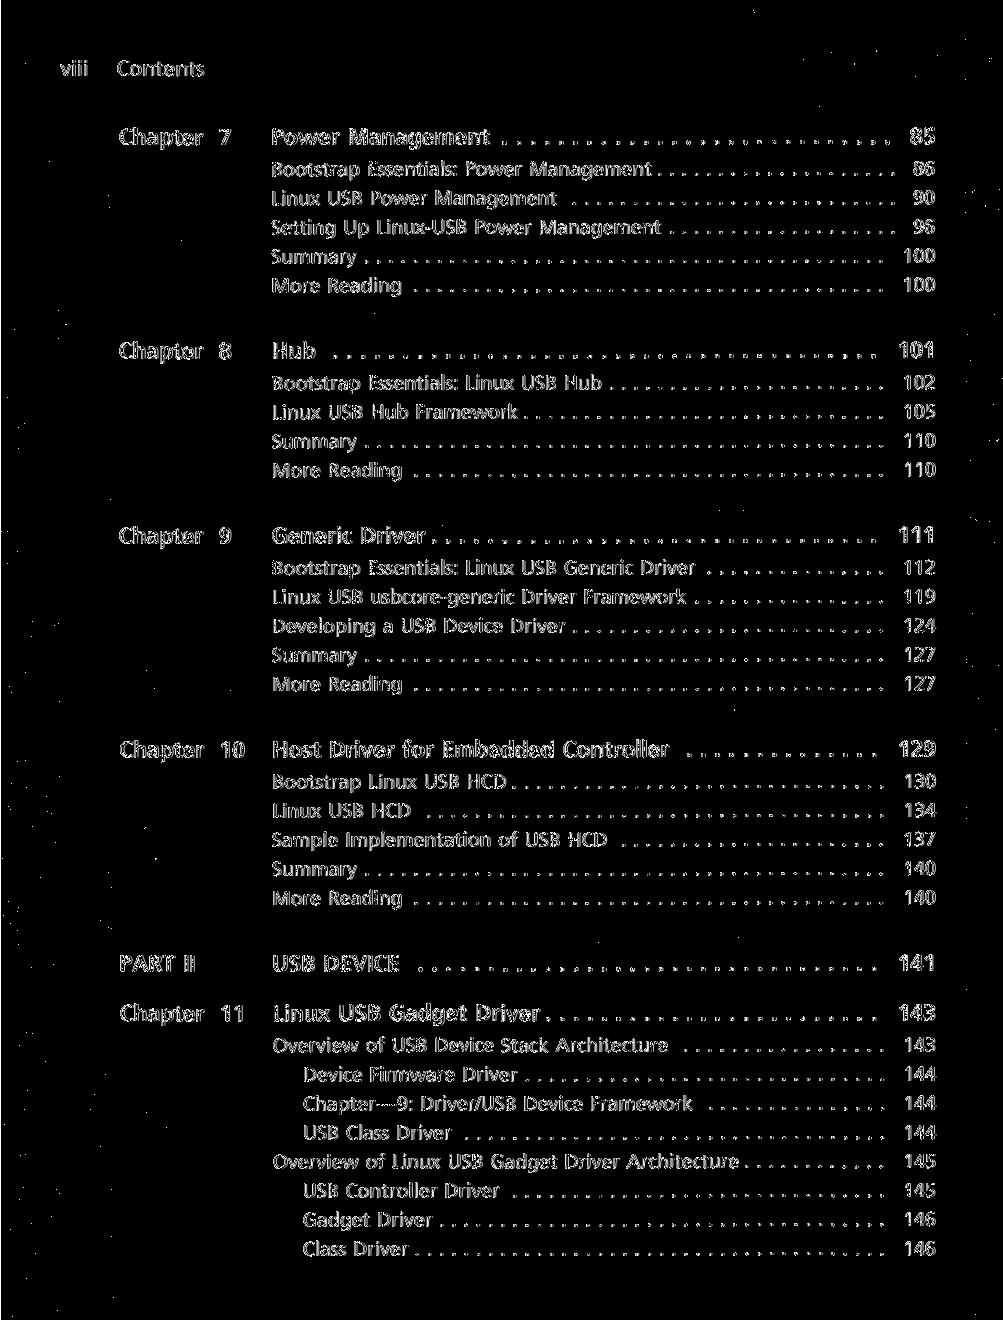 viii Contents Chapter 7 Power Management 85 Bootstrap Essentials: Power Management 86 Linux USB Power Management 90 Setting Up Linux-USB Power Management 96 Summary 100 More Reading 100 Chapter 8 Hub